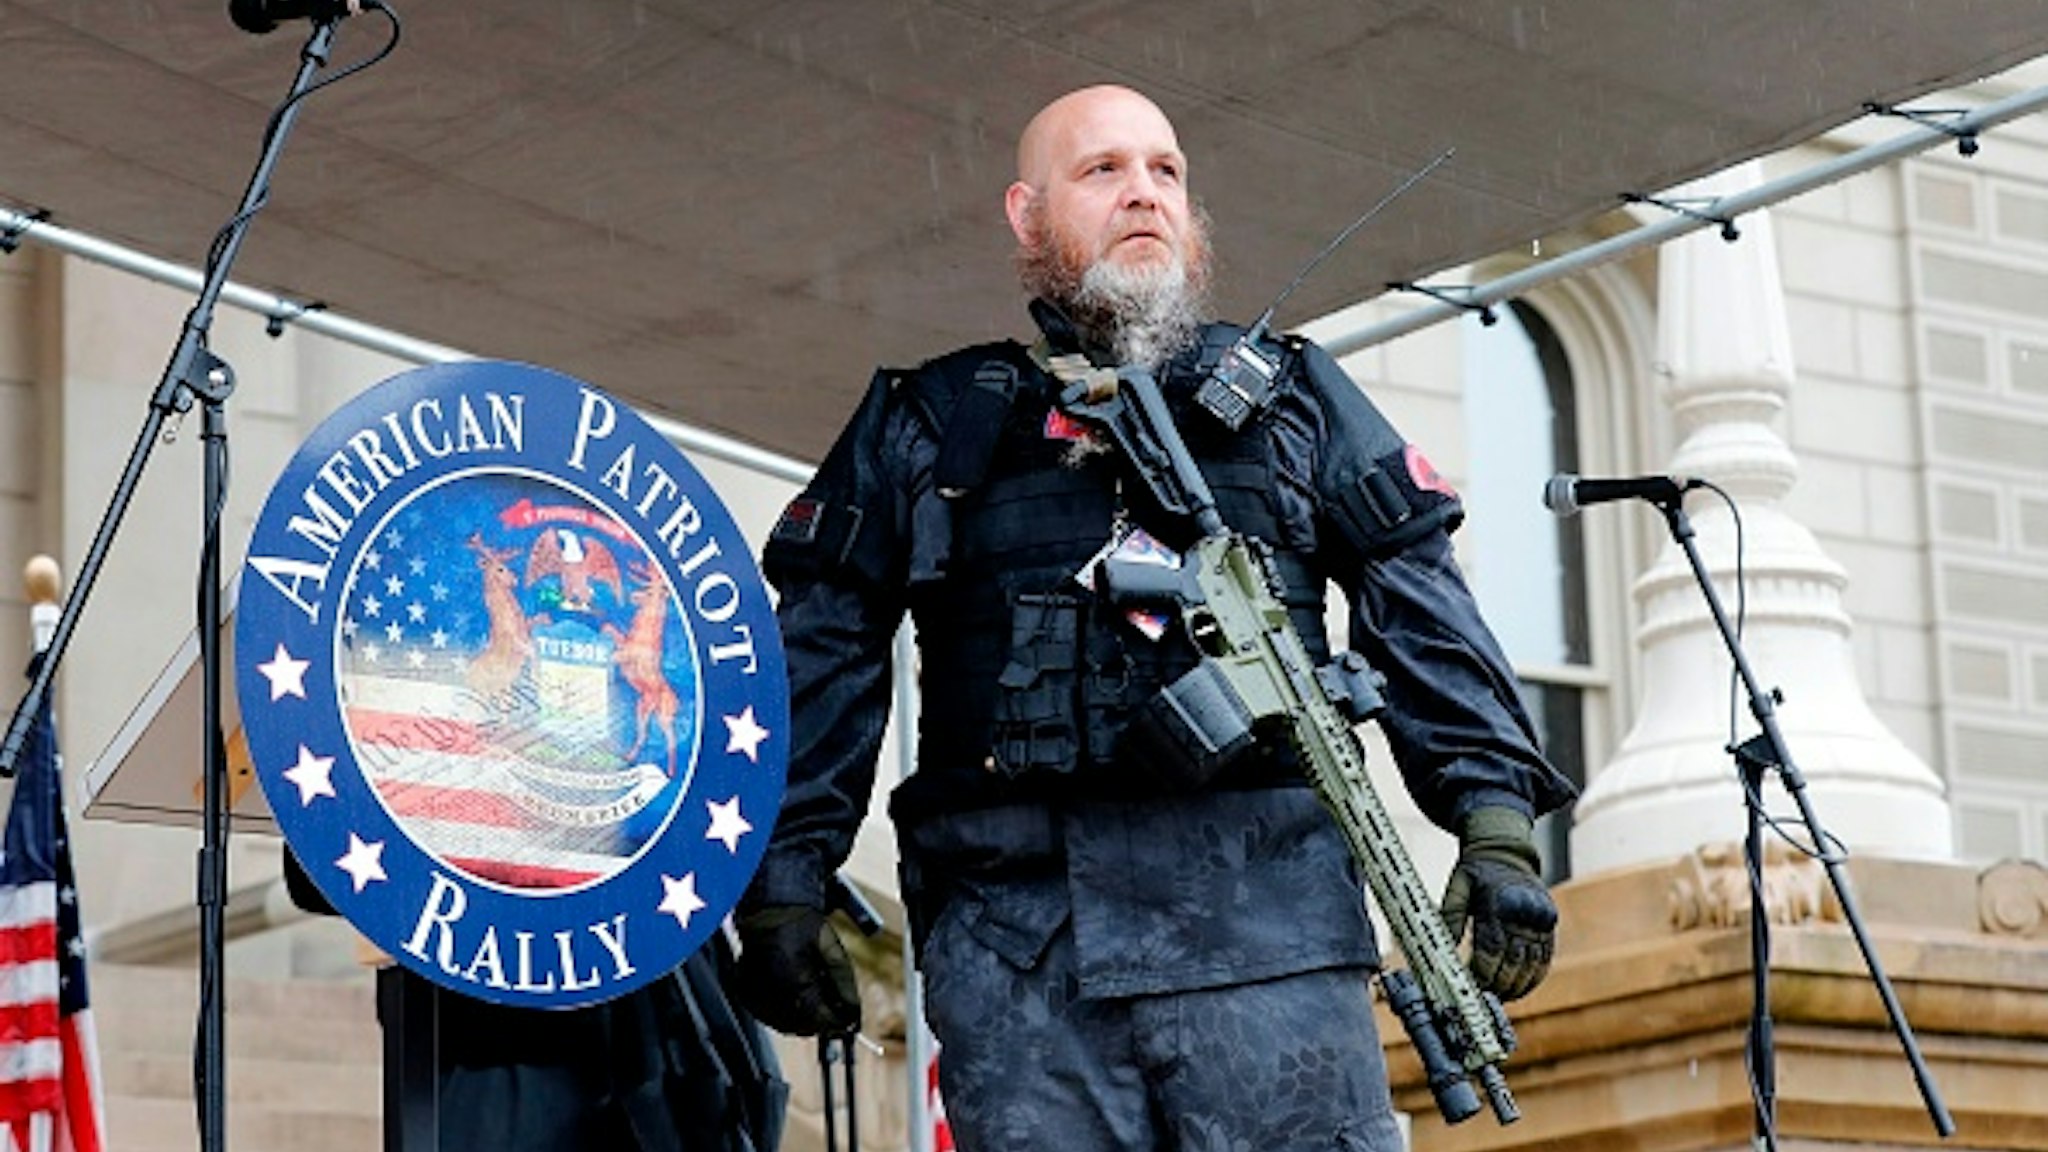 Armed protesters provide security as demonstrators take part in an "American Patriot Rally," organized on April 30, 2020, by Michigan United for Liberty on the steps of the Michigan State Capitol in Lansing, demanding the reopening of businesses. - Michigan's stay-at-home order declared by Democratic Governor Gretchen Whitmer is set to expire after May 15.